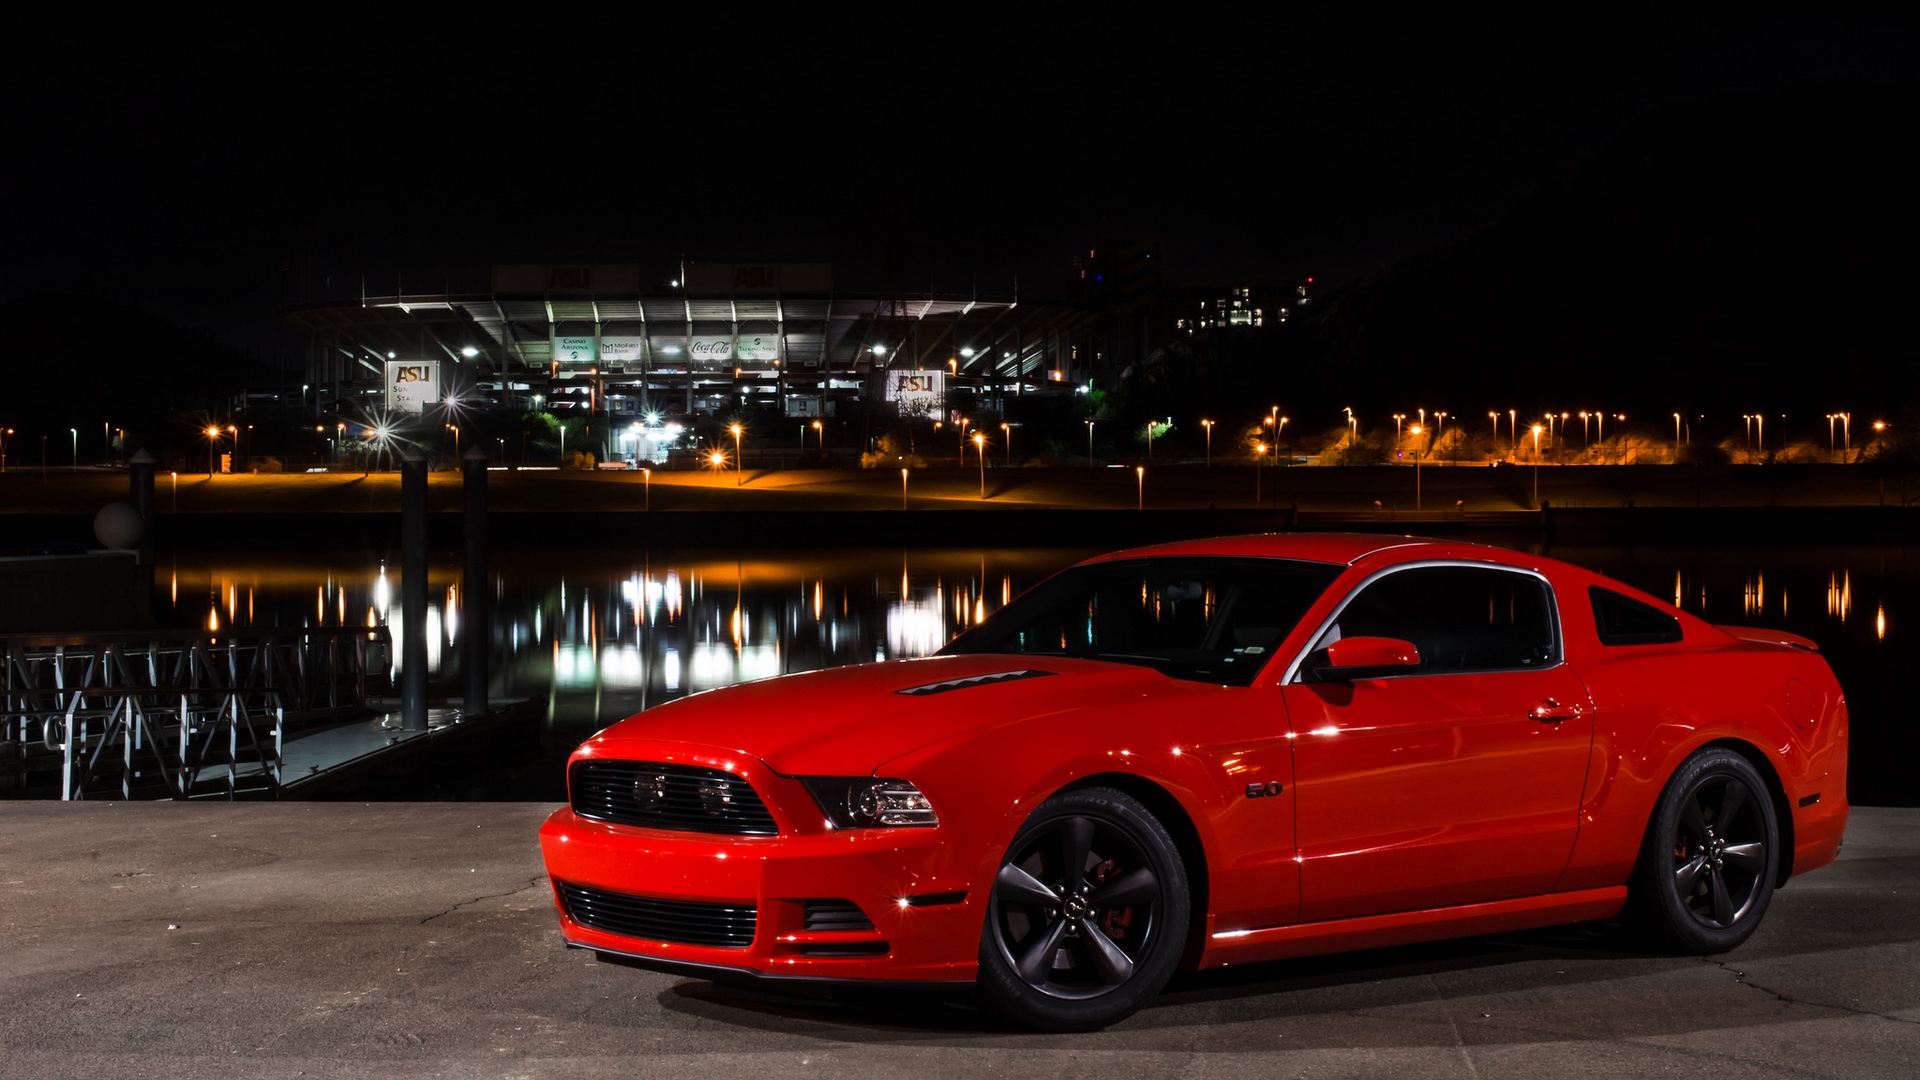 Ford Mustang Hd Wallpapers 1920x1080 Download